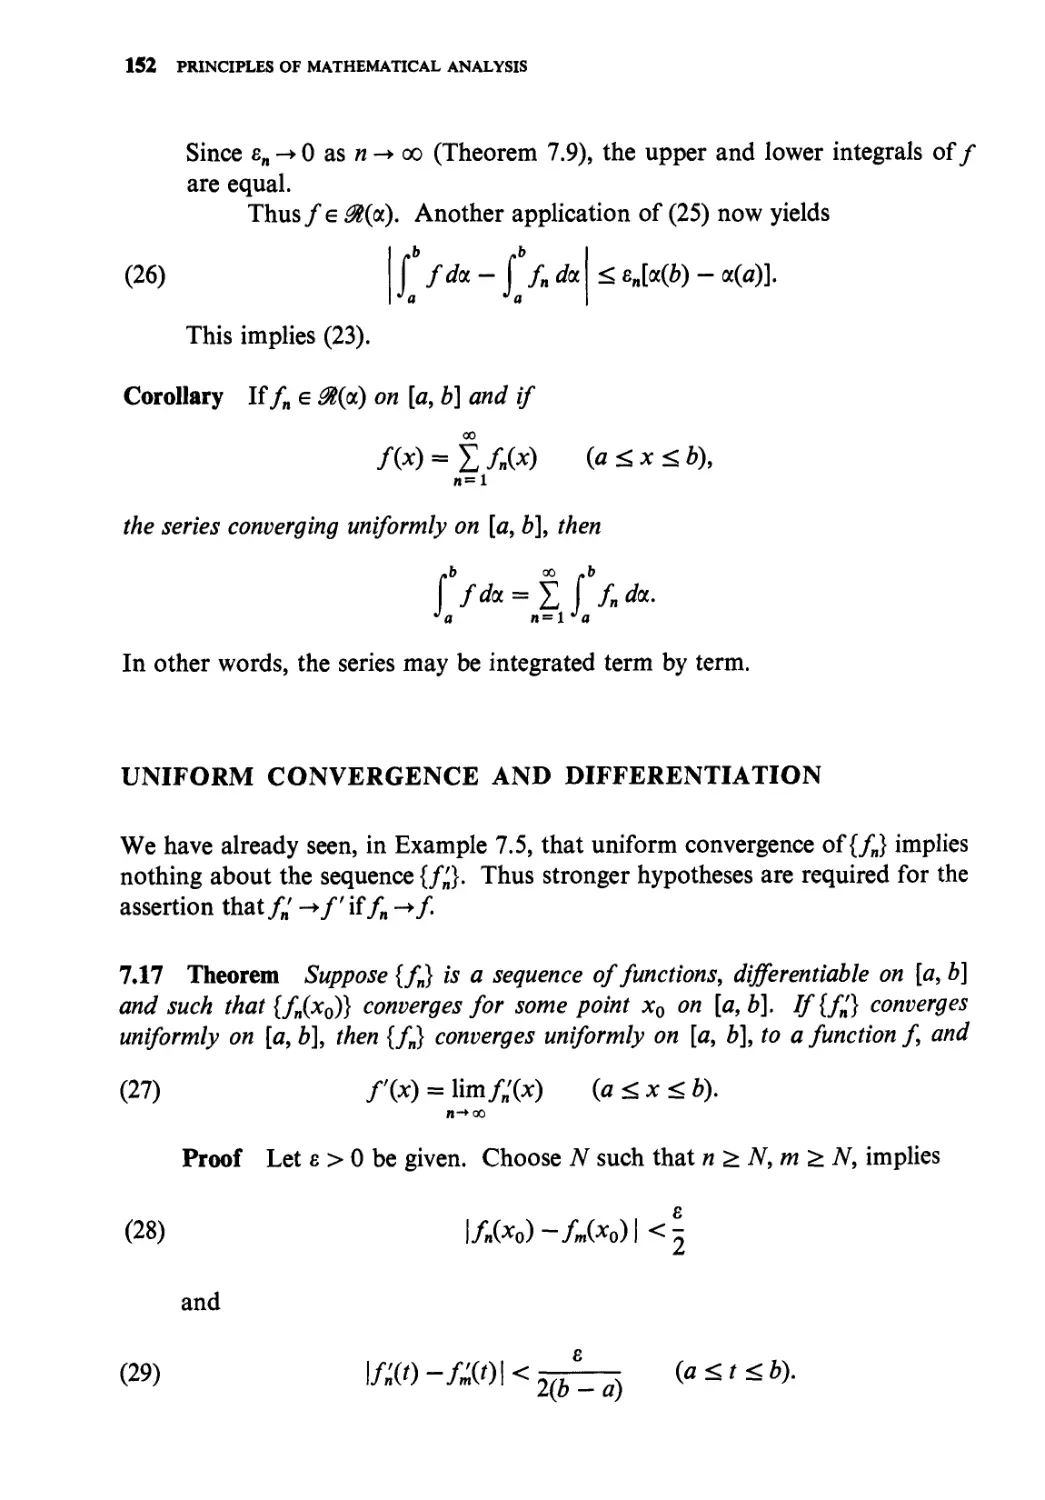 Uniform convergence and differentiation